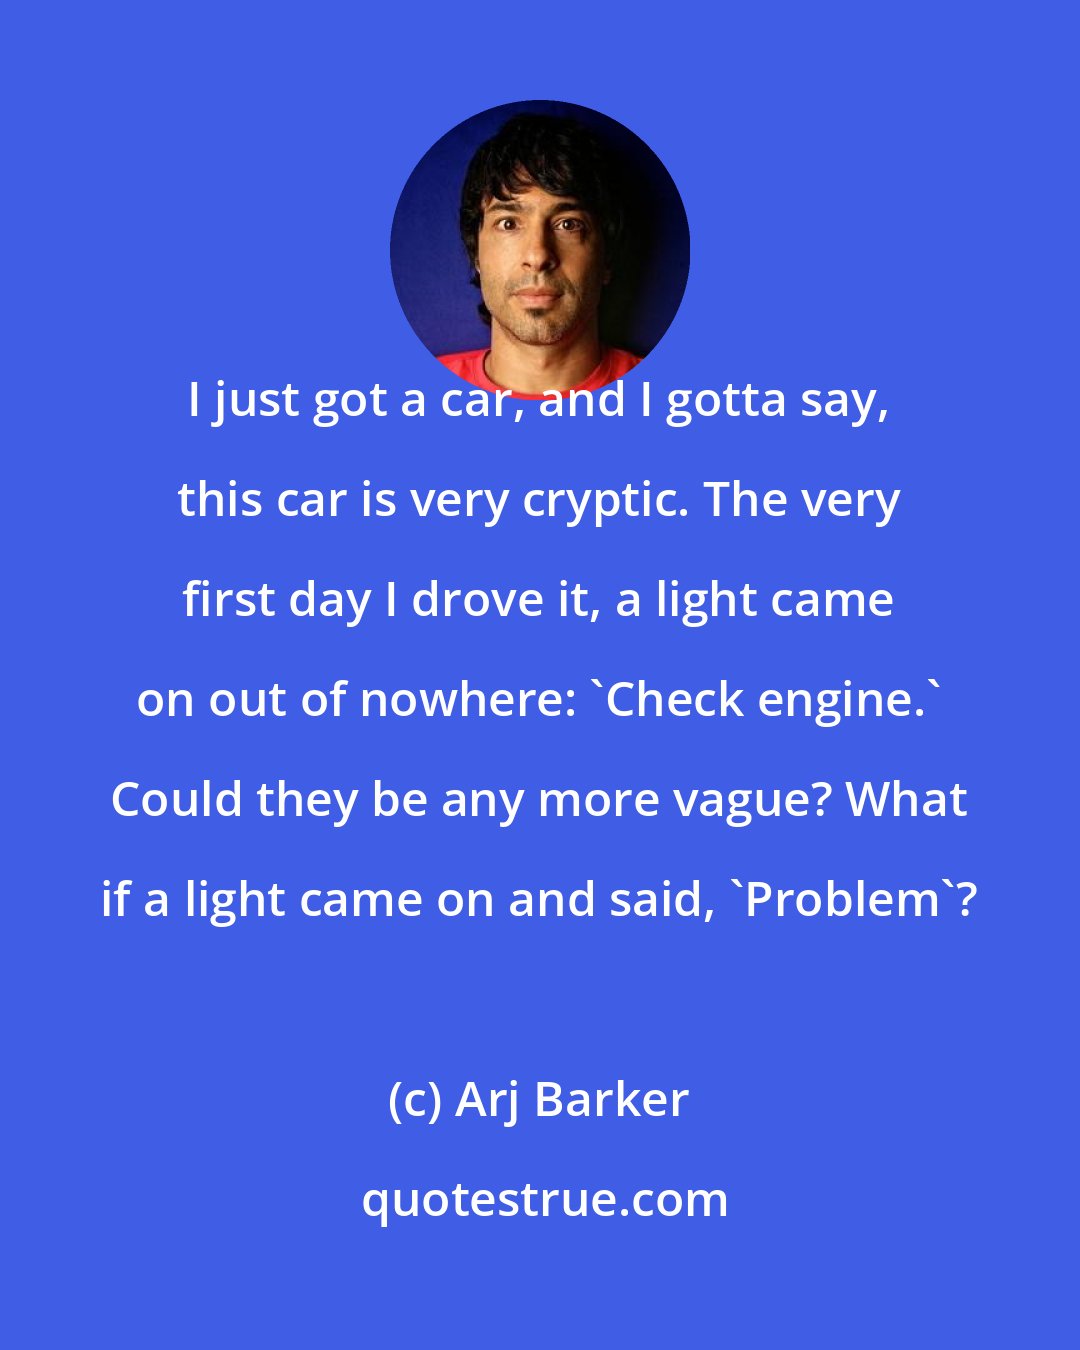 Arj Barker: I just got a car, and I gotta say, this car is very cryptic. The very first day I drove it, a light came on out of nowhere: 'Check engine.' Could they be any more vague? What if a light came on and said, 'Problem'?